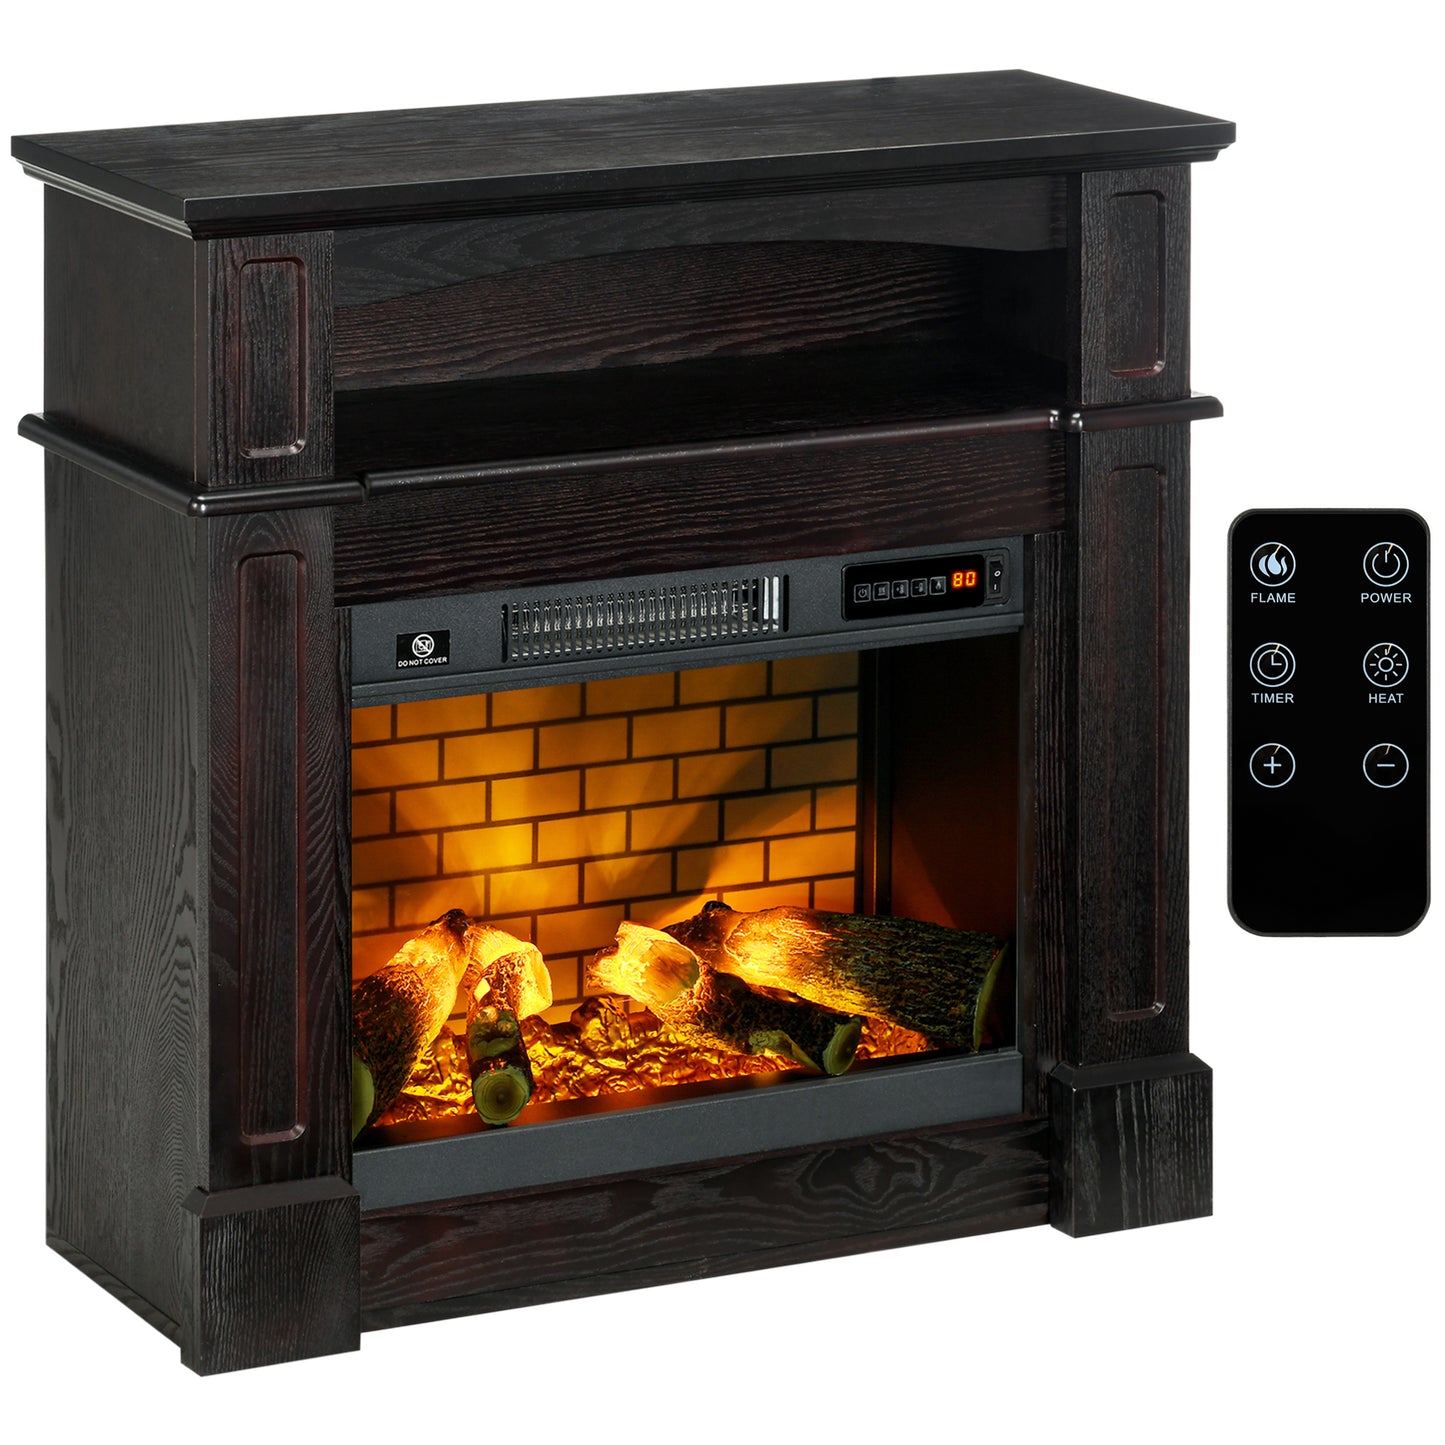 32 Electric Fireplace with Mantel and Shelf, Freestanding Heater with LED Log Flame and Remote Control, 700W/1400W, Brown